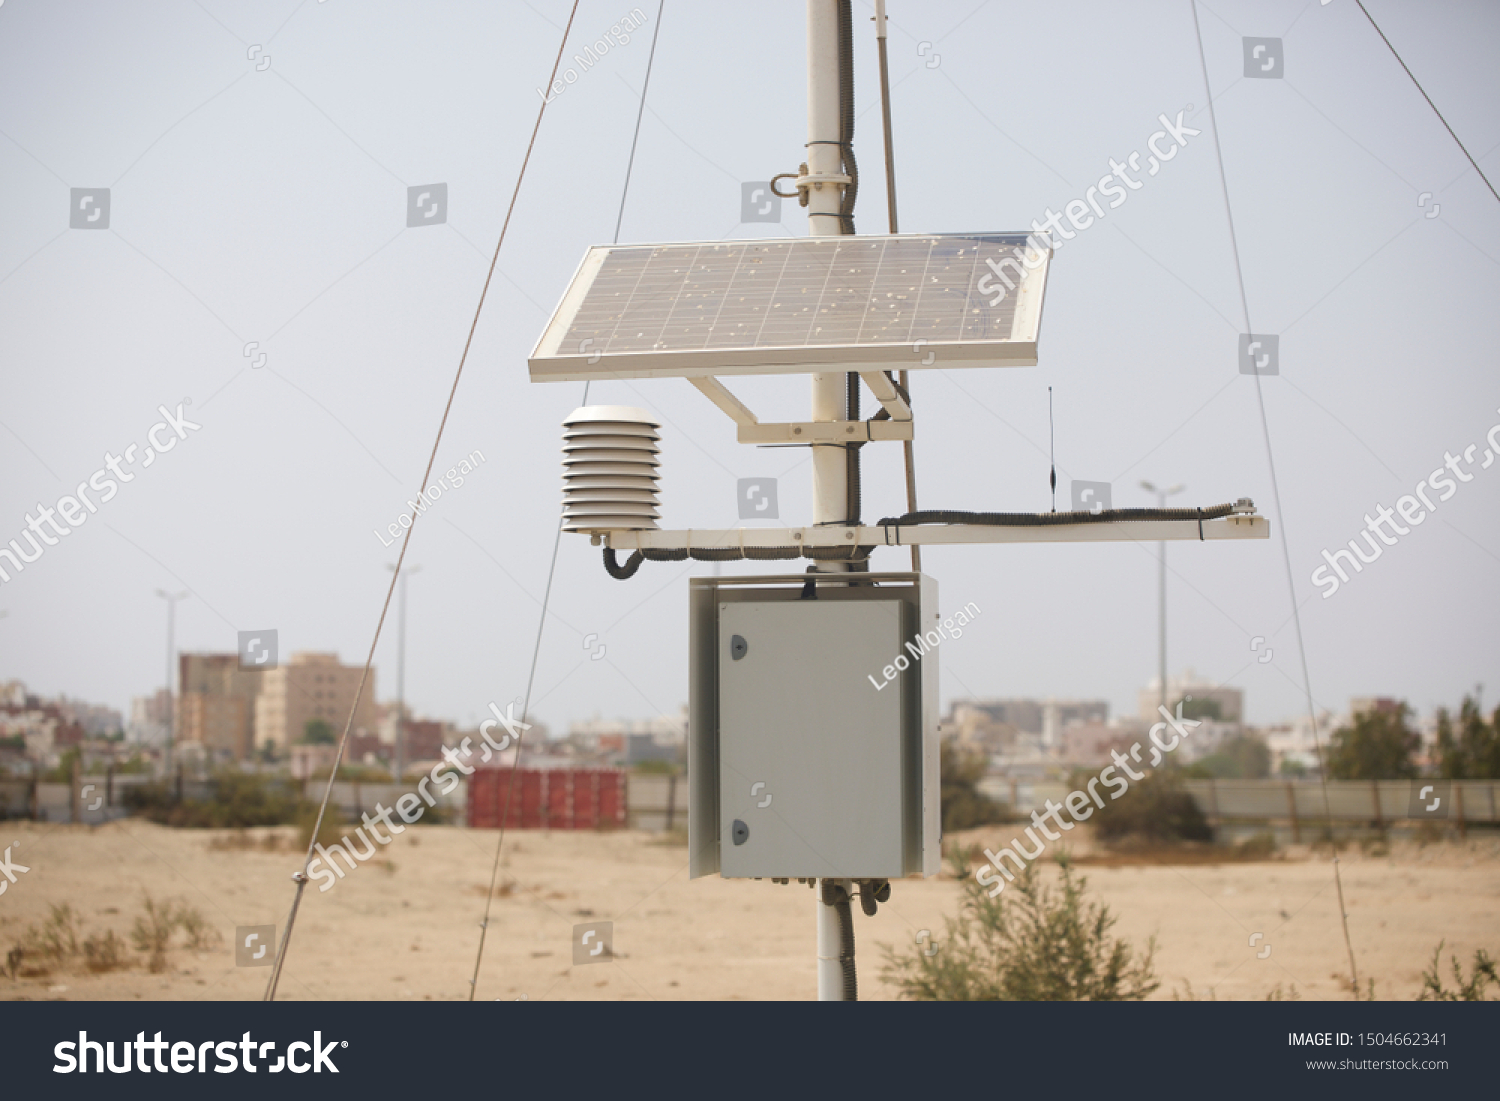 Meteorological equipment's , used for monitoring weather and climatic conditions #1504662341